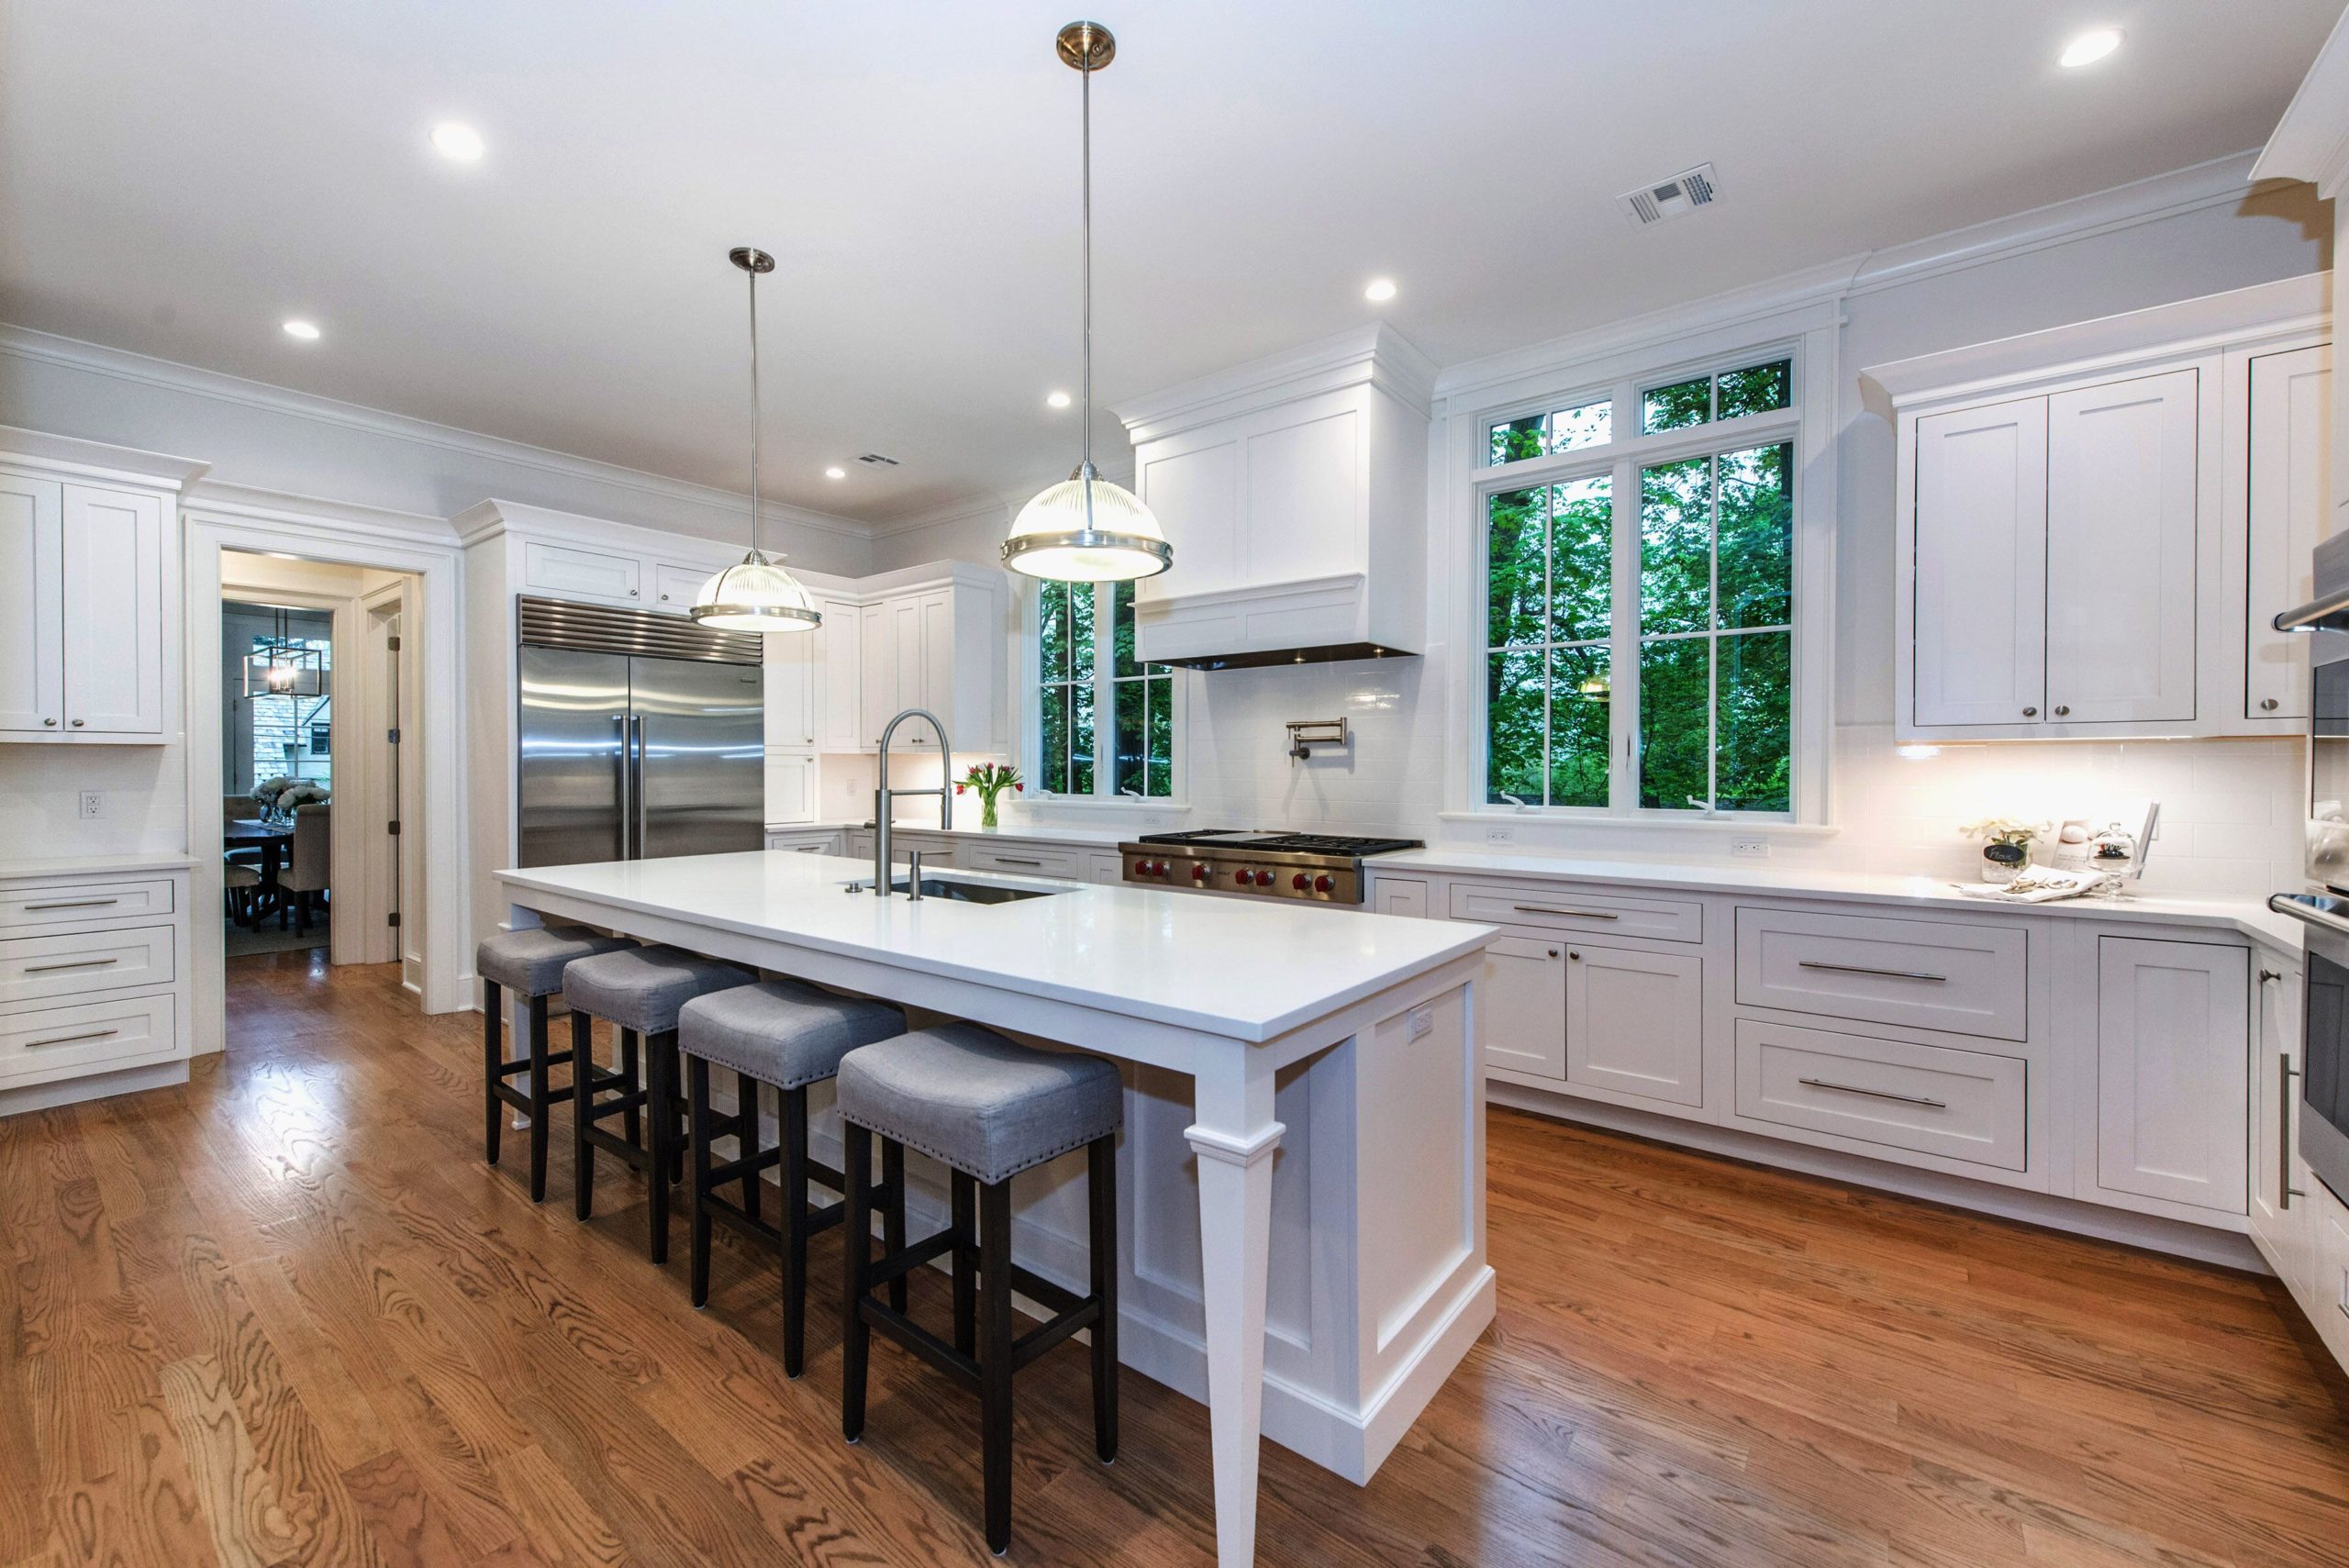 Kitchen Cabinets | BJ Floors and Kitchens